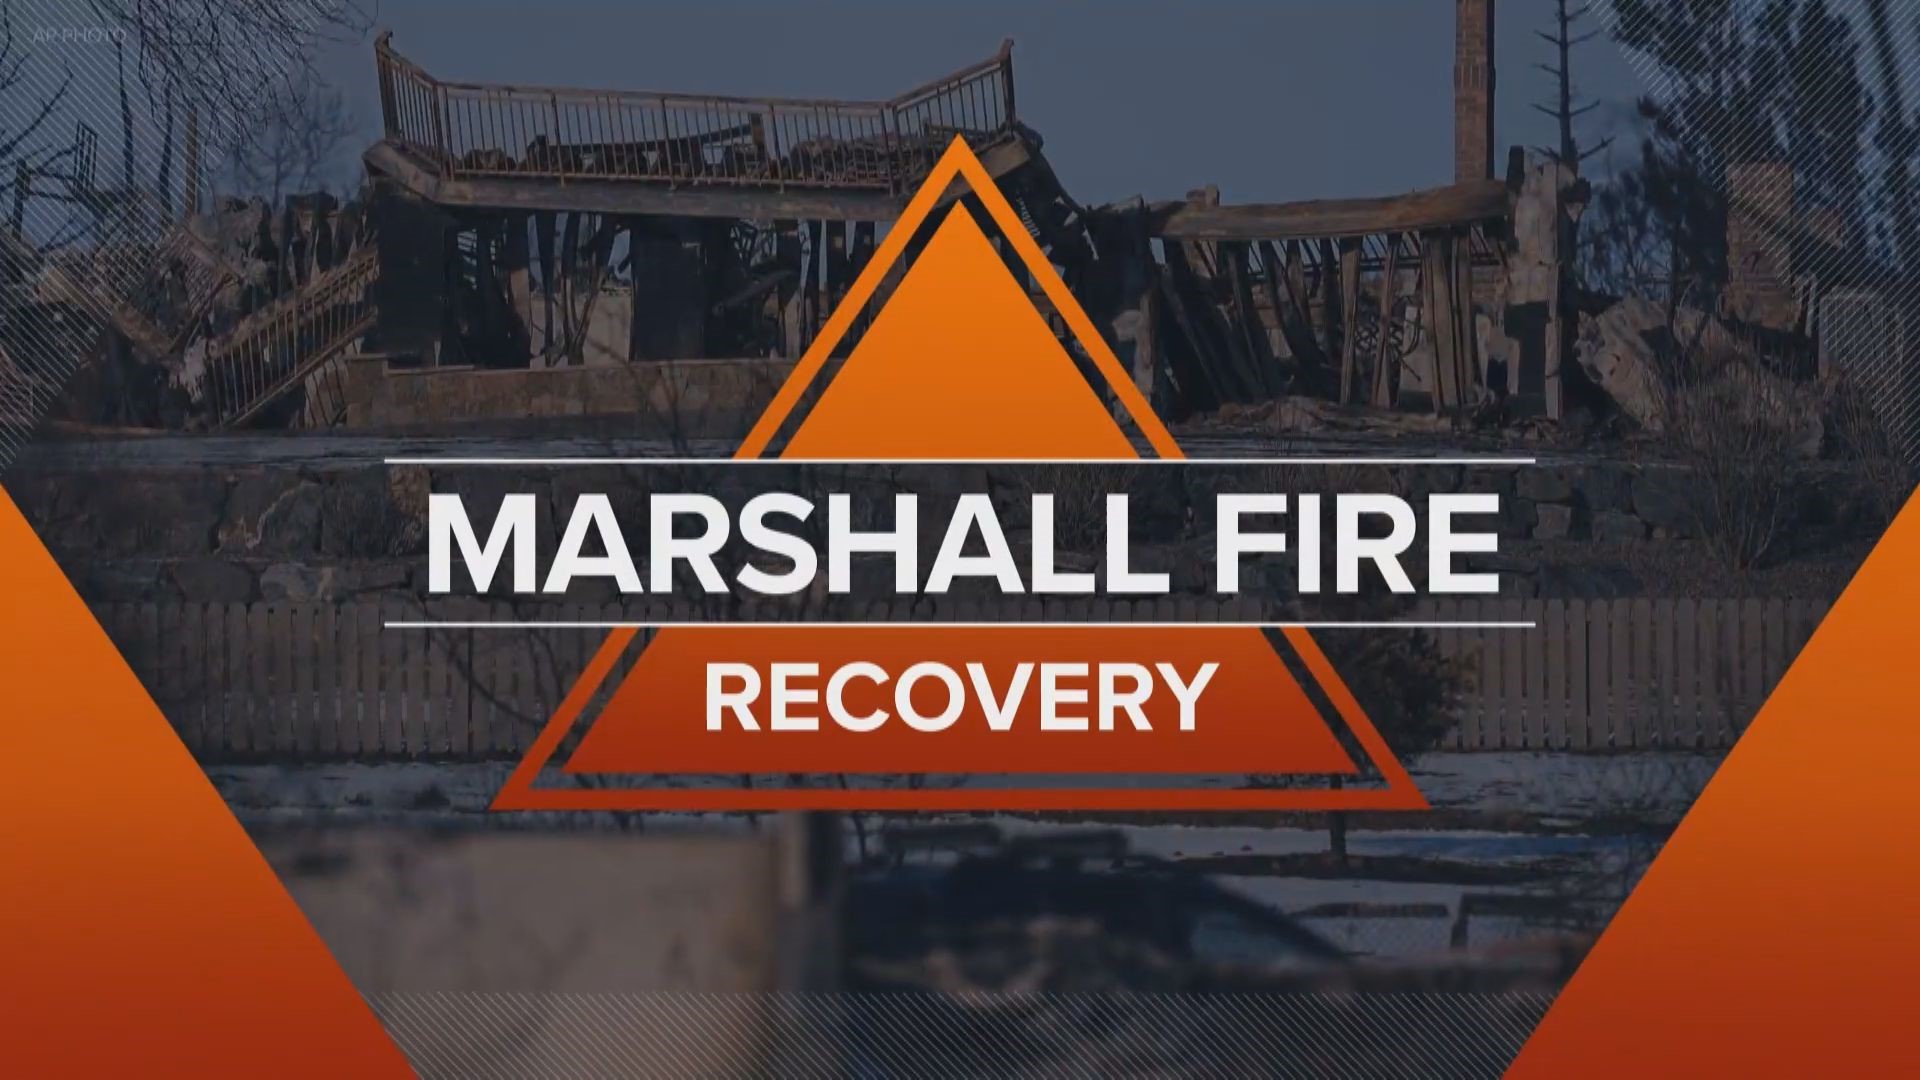 We follow three families that survived the Marshall Fire on their journey toward recovery and rebuilding.